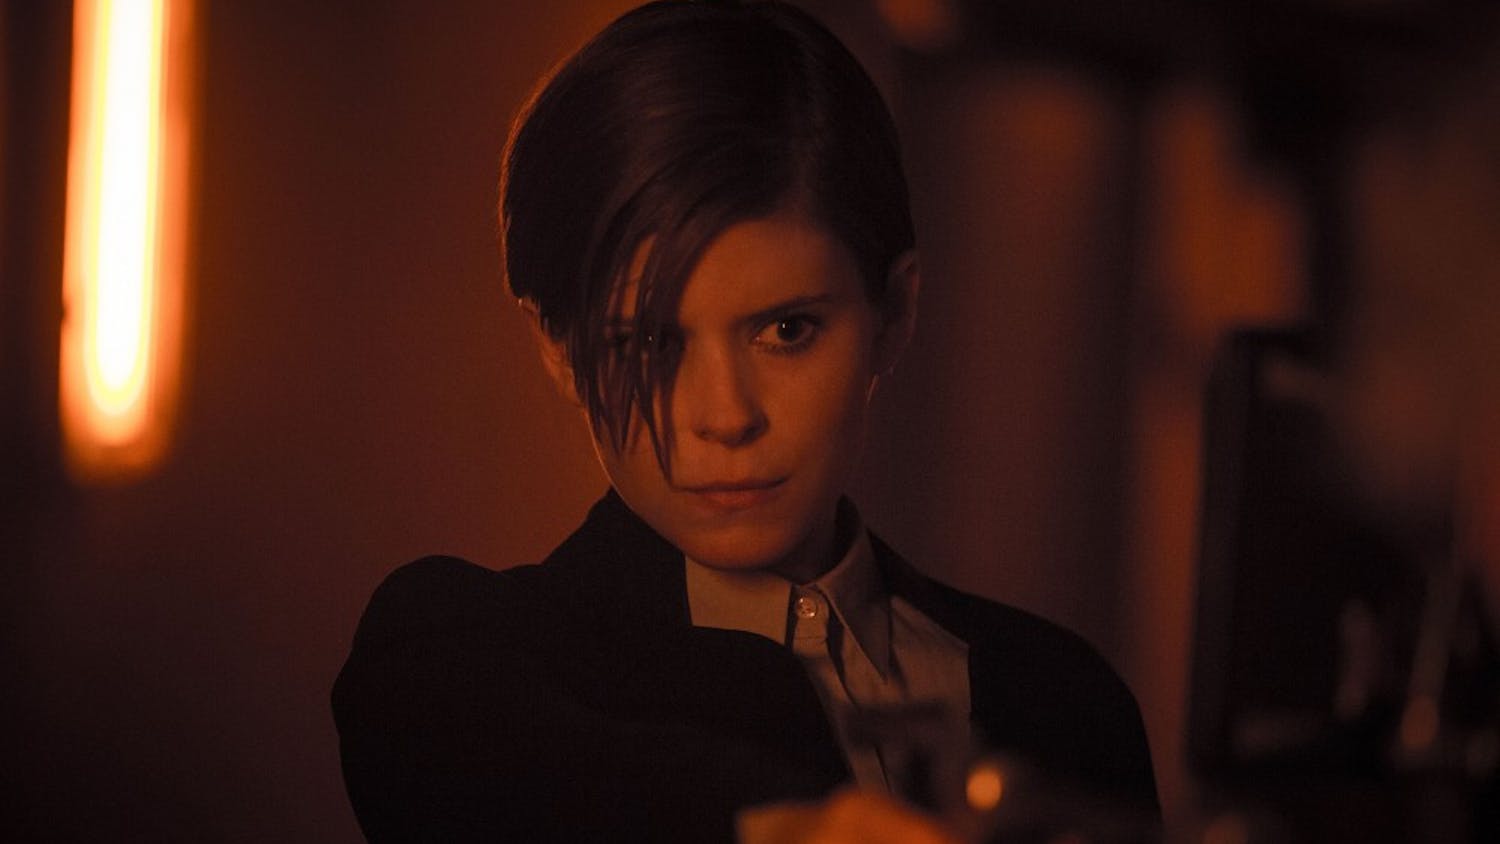 Kate Mara as Lee Weathers in the movie "Morgan" portrays a corporate troubleshooter whose investigation of a seemingly innocent human named Morgan, suddenly takes a dangerous turn. (Aidan Monaghan/20th Century Fox/TNS)